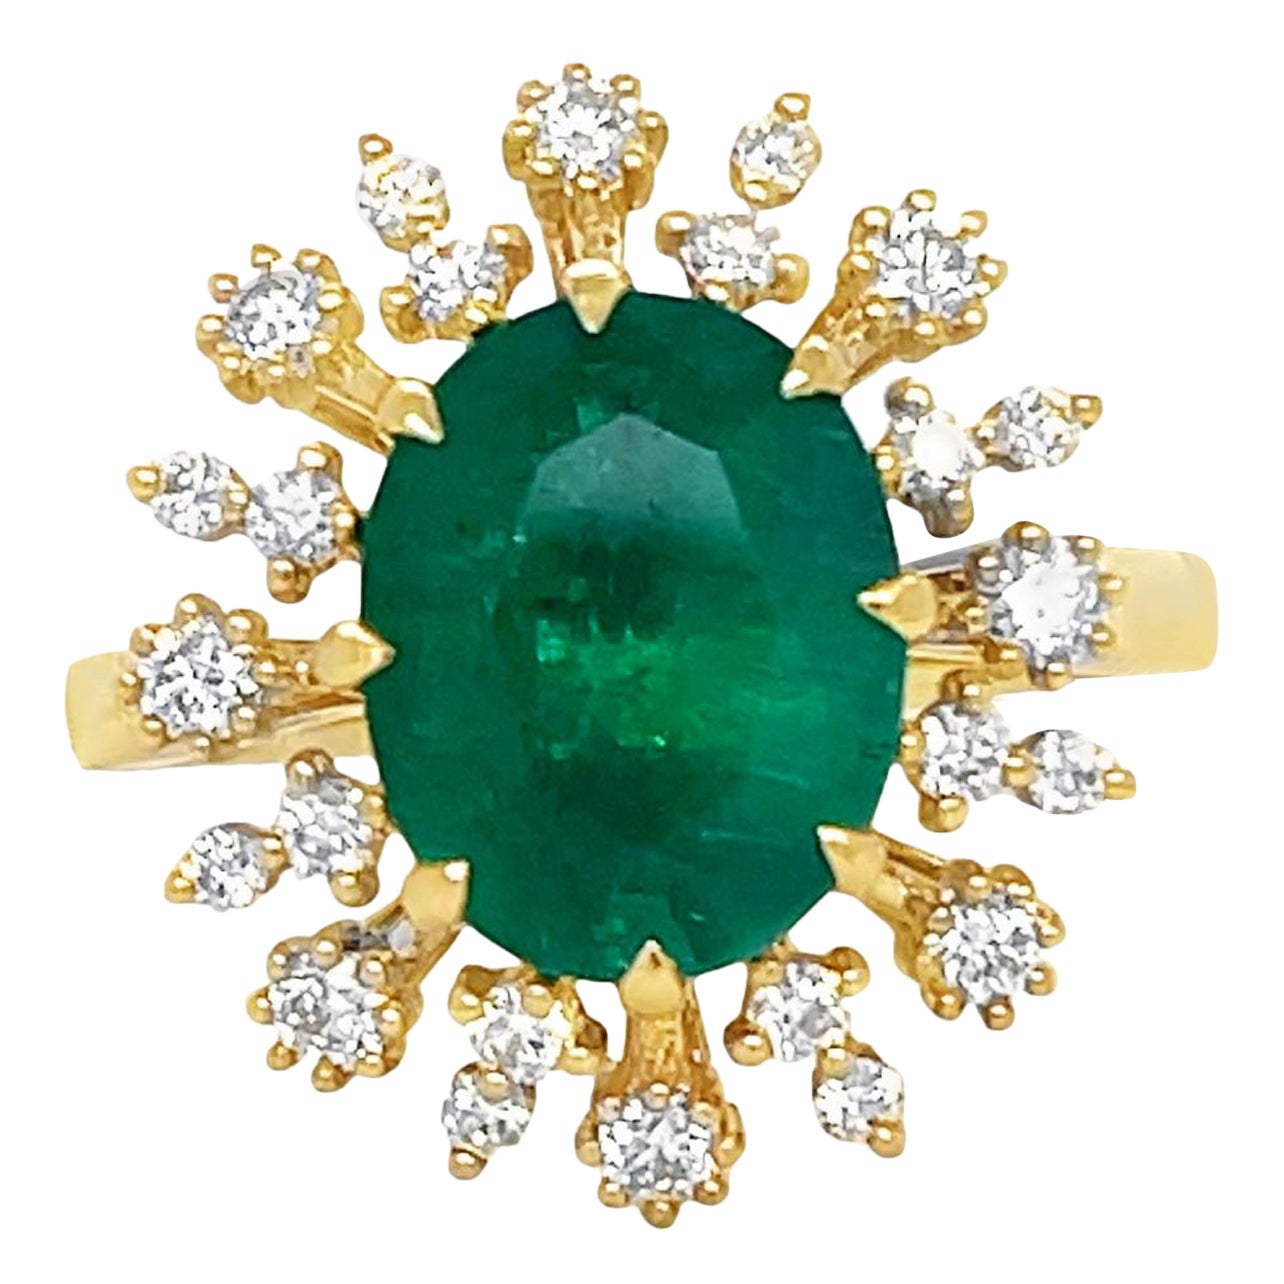 Natural Emerald and Diamond Ring in 14k Yellow Gold